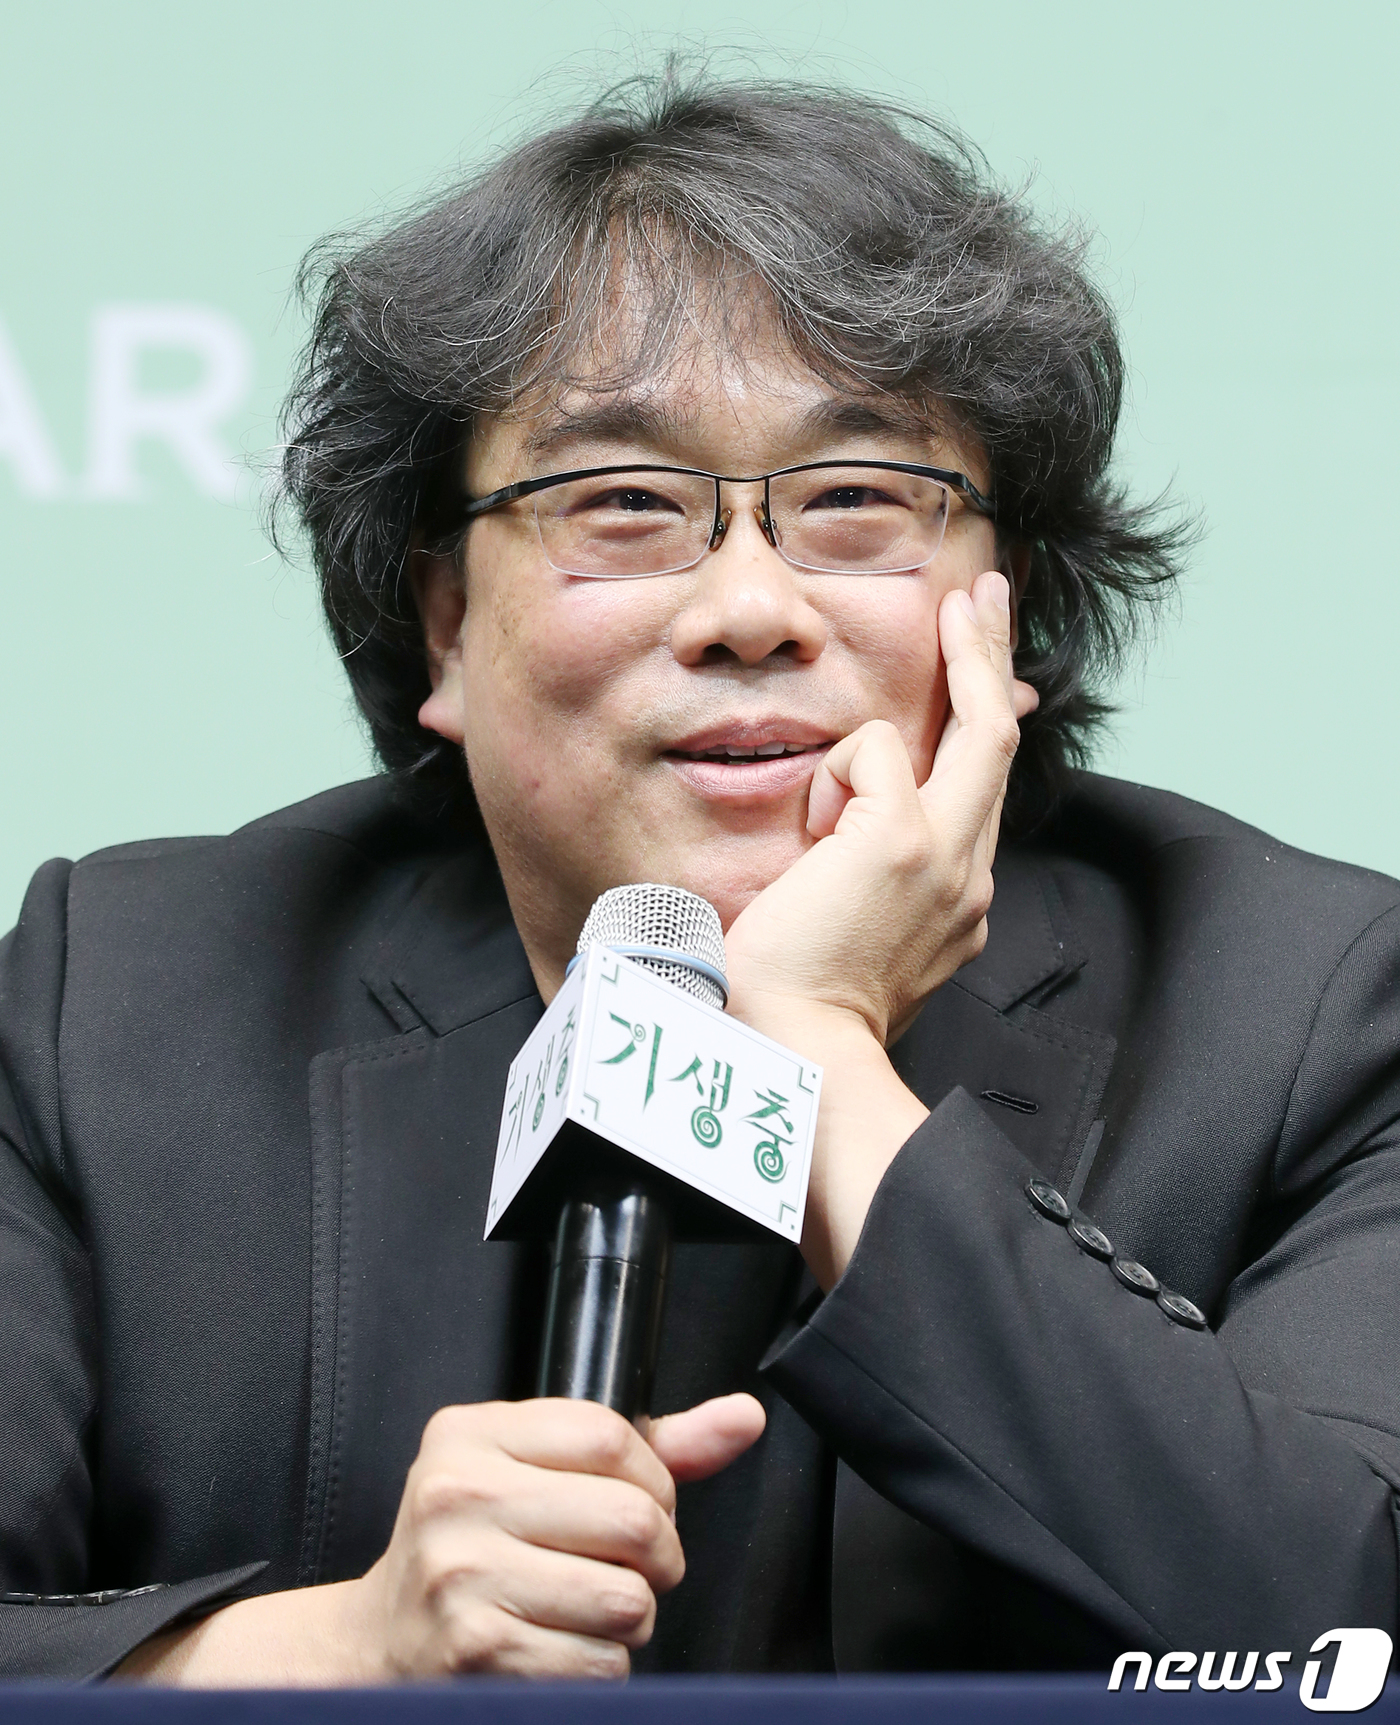 According to the 21st Film Industry Structural Reform Legislation Meeting, the Post Bong Joon-ho Act online signing campaign, which requires the improvement of the unbalanced film industry structure, started at 11:30 am on the 18th and exceeded 1,000 people in about 48 hours.The Post Bong Joon-ho Act contains contents such as  limitation of movie distribution business and commercial business of large corporations  prohibition of screen monopoly of specific movies  prohibition of monopoly of specific movie screen  independence and institutionalization of support for art movies and exclusive use.The first signatories of the signing movement included mid-sized directors such as Im Kwon-taek Lee Jang-ho, Lee Chang-dong, Jung Young Lim, and 59 middle and famous actors such as Ahn Sung-ki Moon Sung-geun Jung Woo-sung Cho Jin-woong Jung Jin-young, producers, writers, unions, critics, professors, policy and film festival personnel.By function, more than 1,000 filmmakers were composed of 25%, 18%, Acting 13%, scenario 8%, shooting 5%, academic 4%, review 3% and Toei Animation 3%.